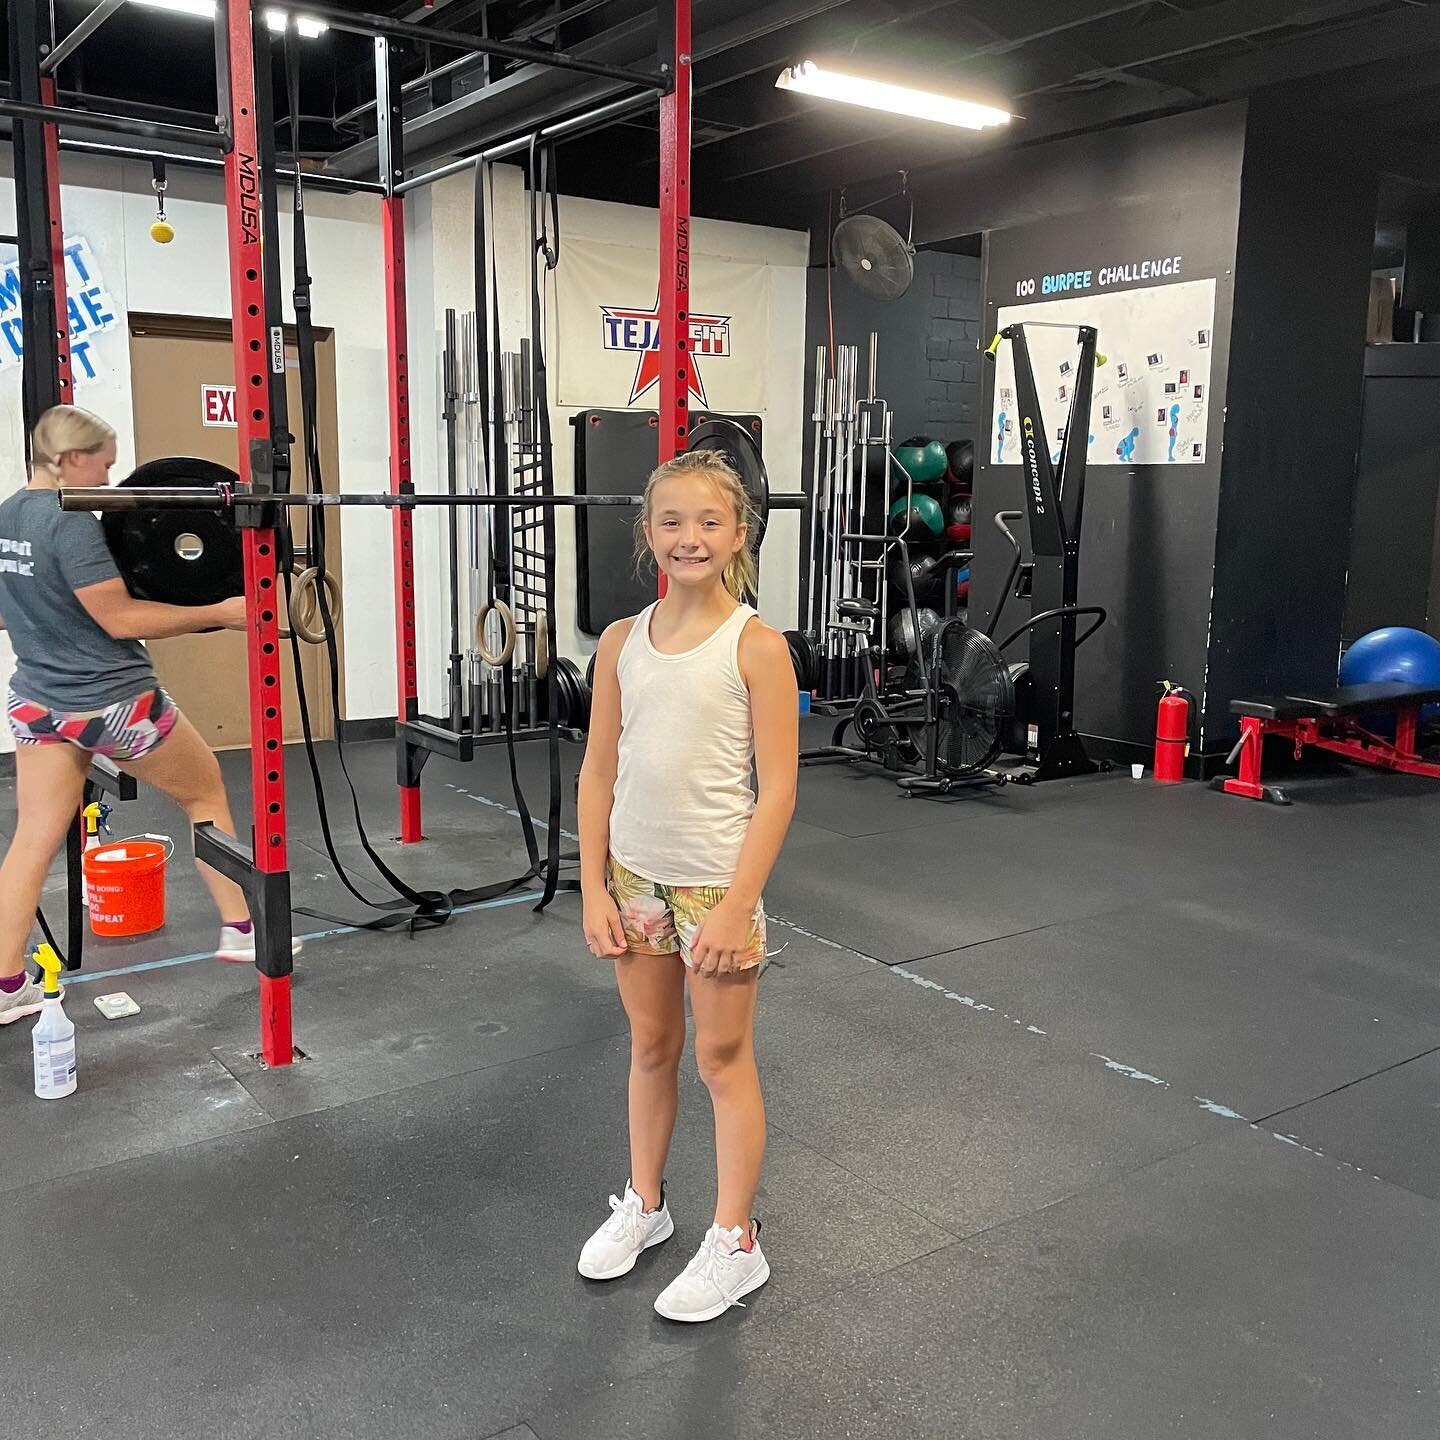 We want to congratulate Ava for completing the 100 burpee challenge in 7:14! Come see how quickly you can do burpees and get your photo on the wall!!

Class Schedule for Labor Day (Monday Sept 6th) is
9:00am and 4:30pm! Come join us!